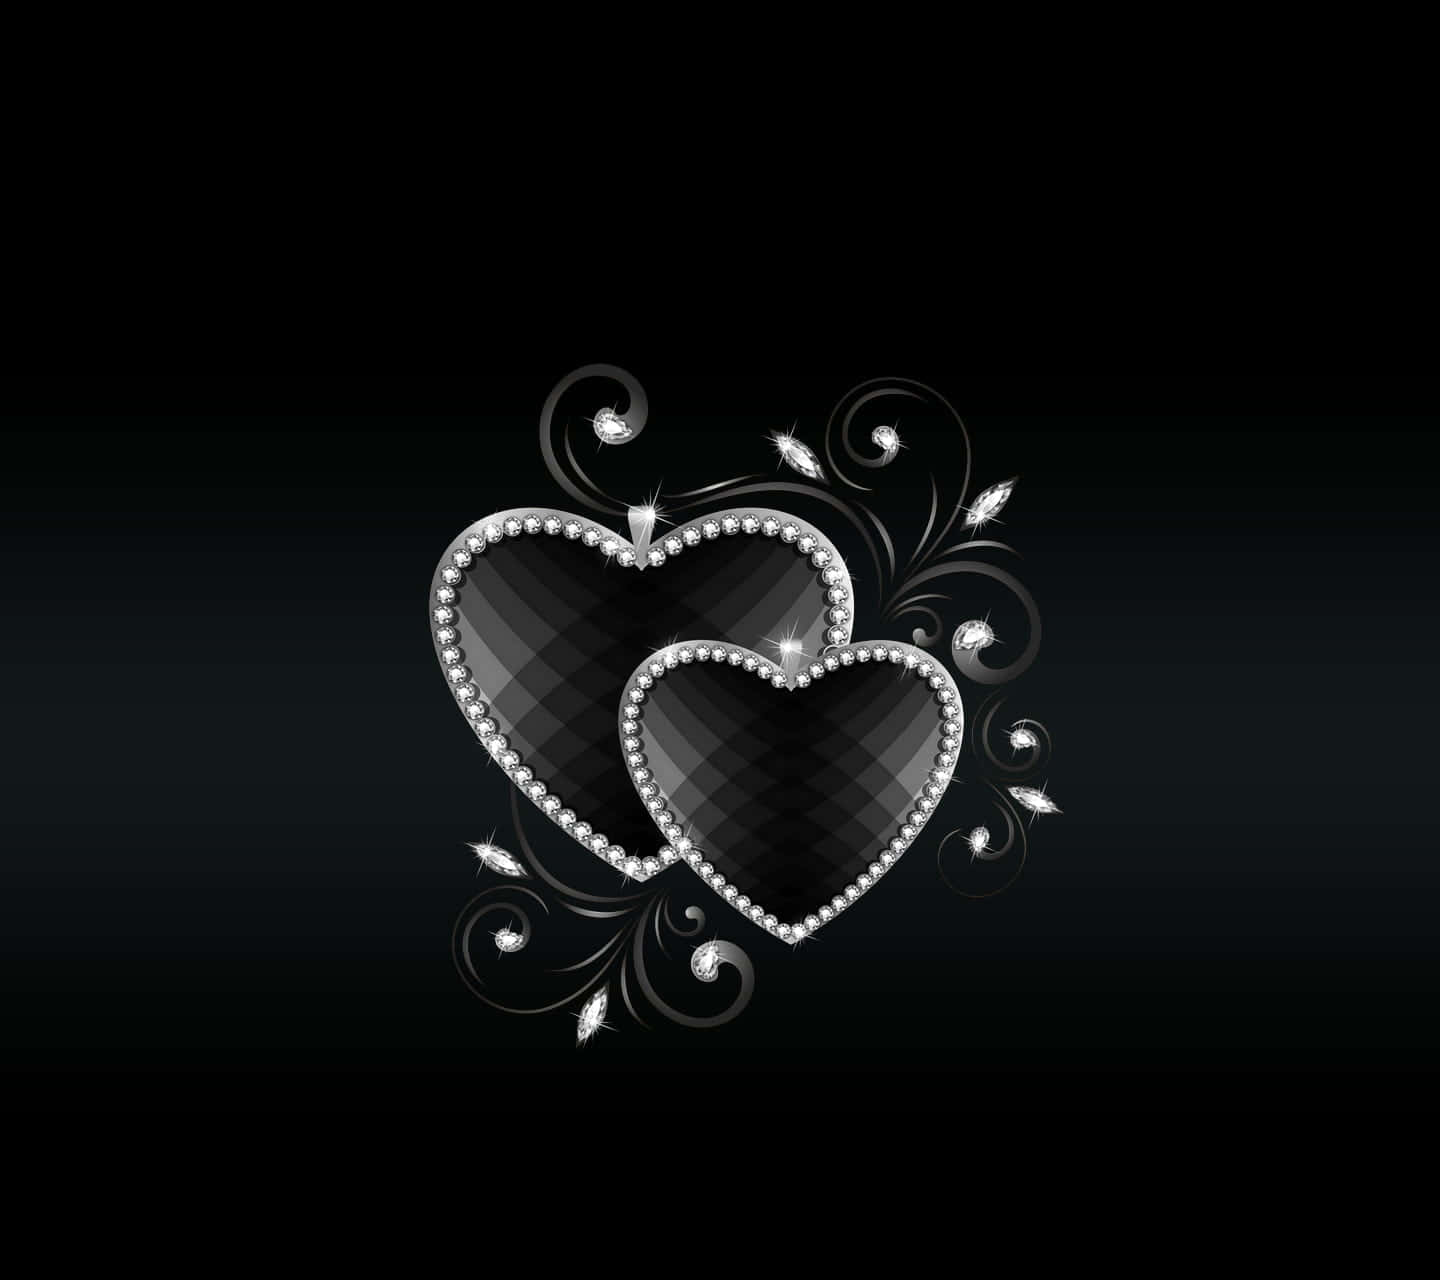 A background of a black heart on a dark backdrop